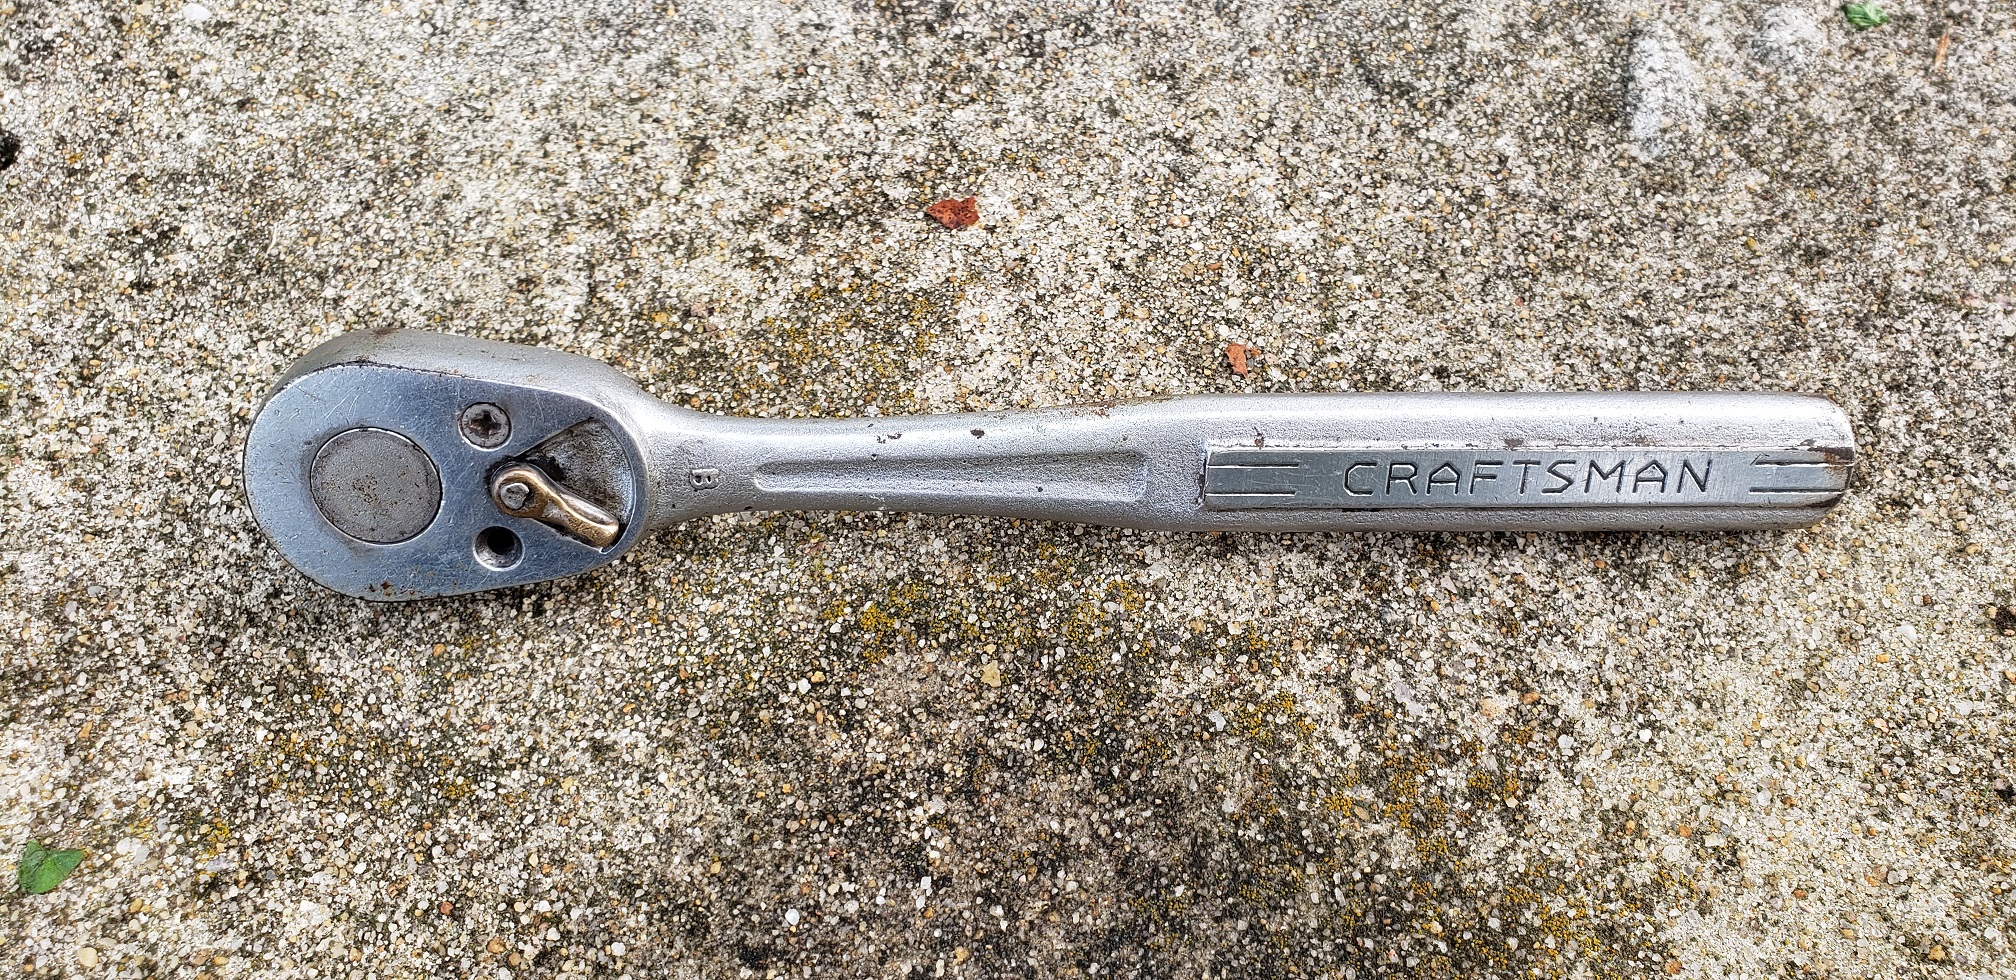 1953-56 Sears Craftsman ratchet wrench